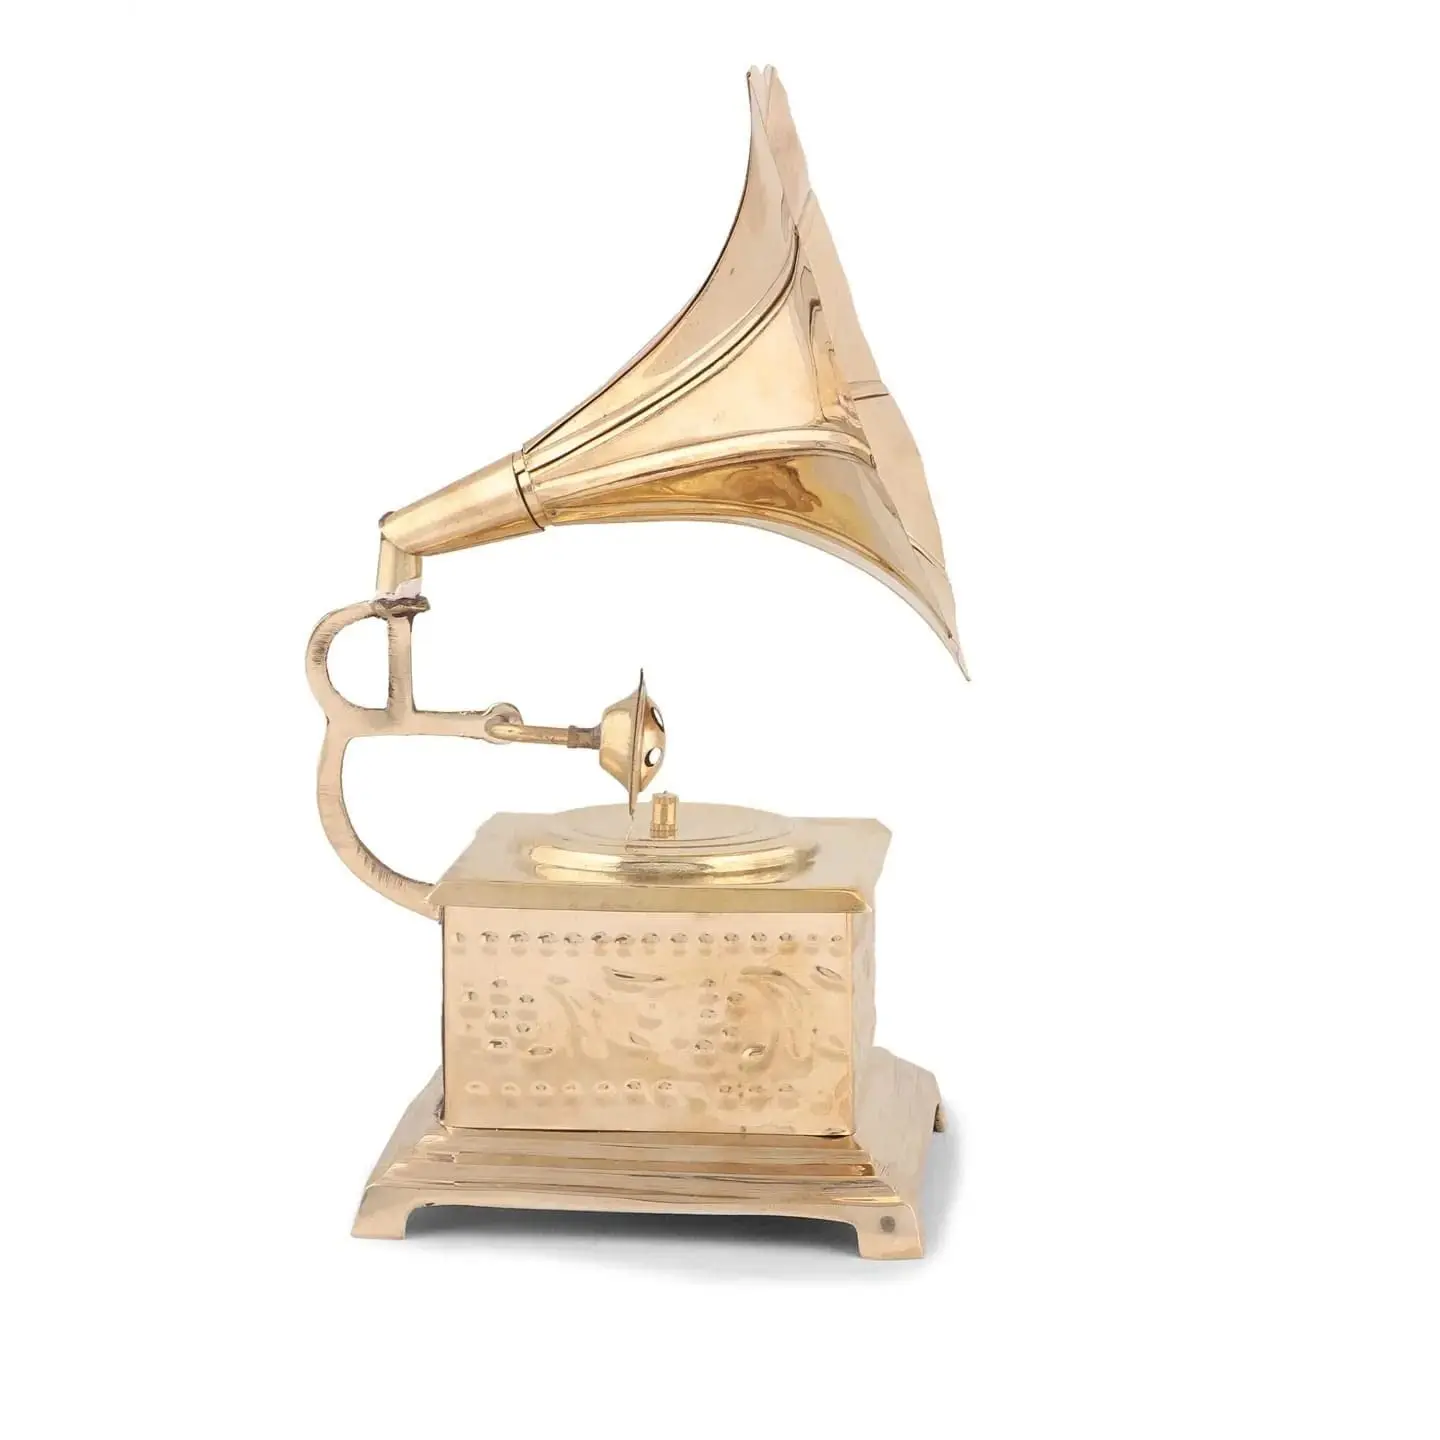 wholesale price Gramophone Brass Phonograph Horn Antique Vintage Player Crafted Working Box Functional Sound Desk Gift